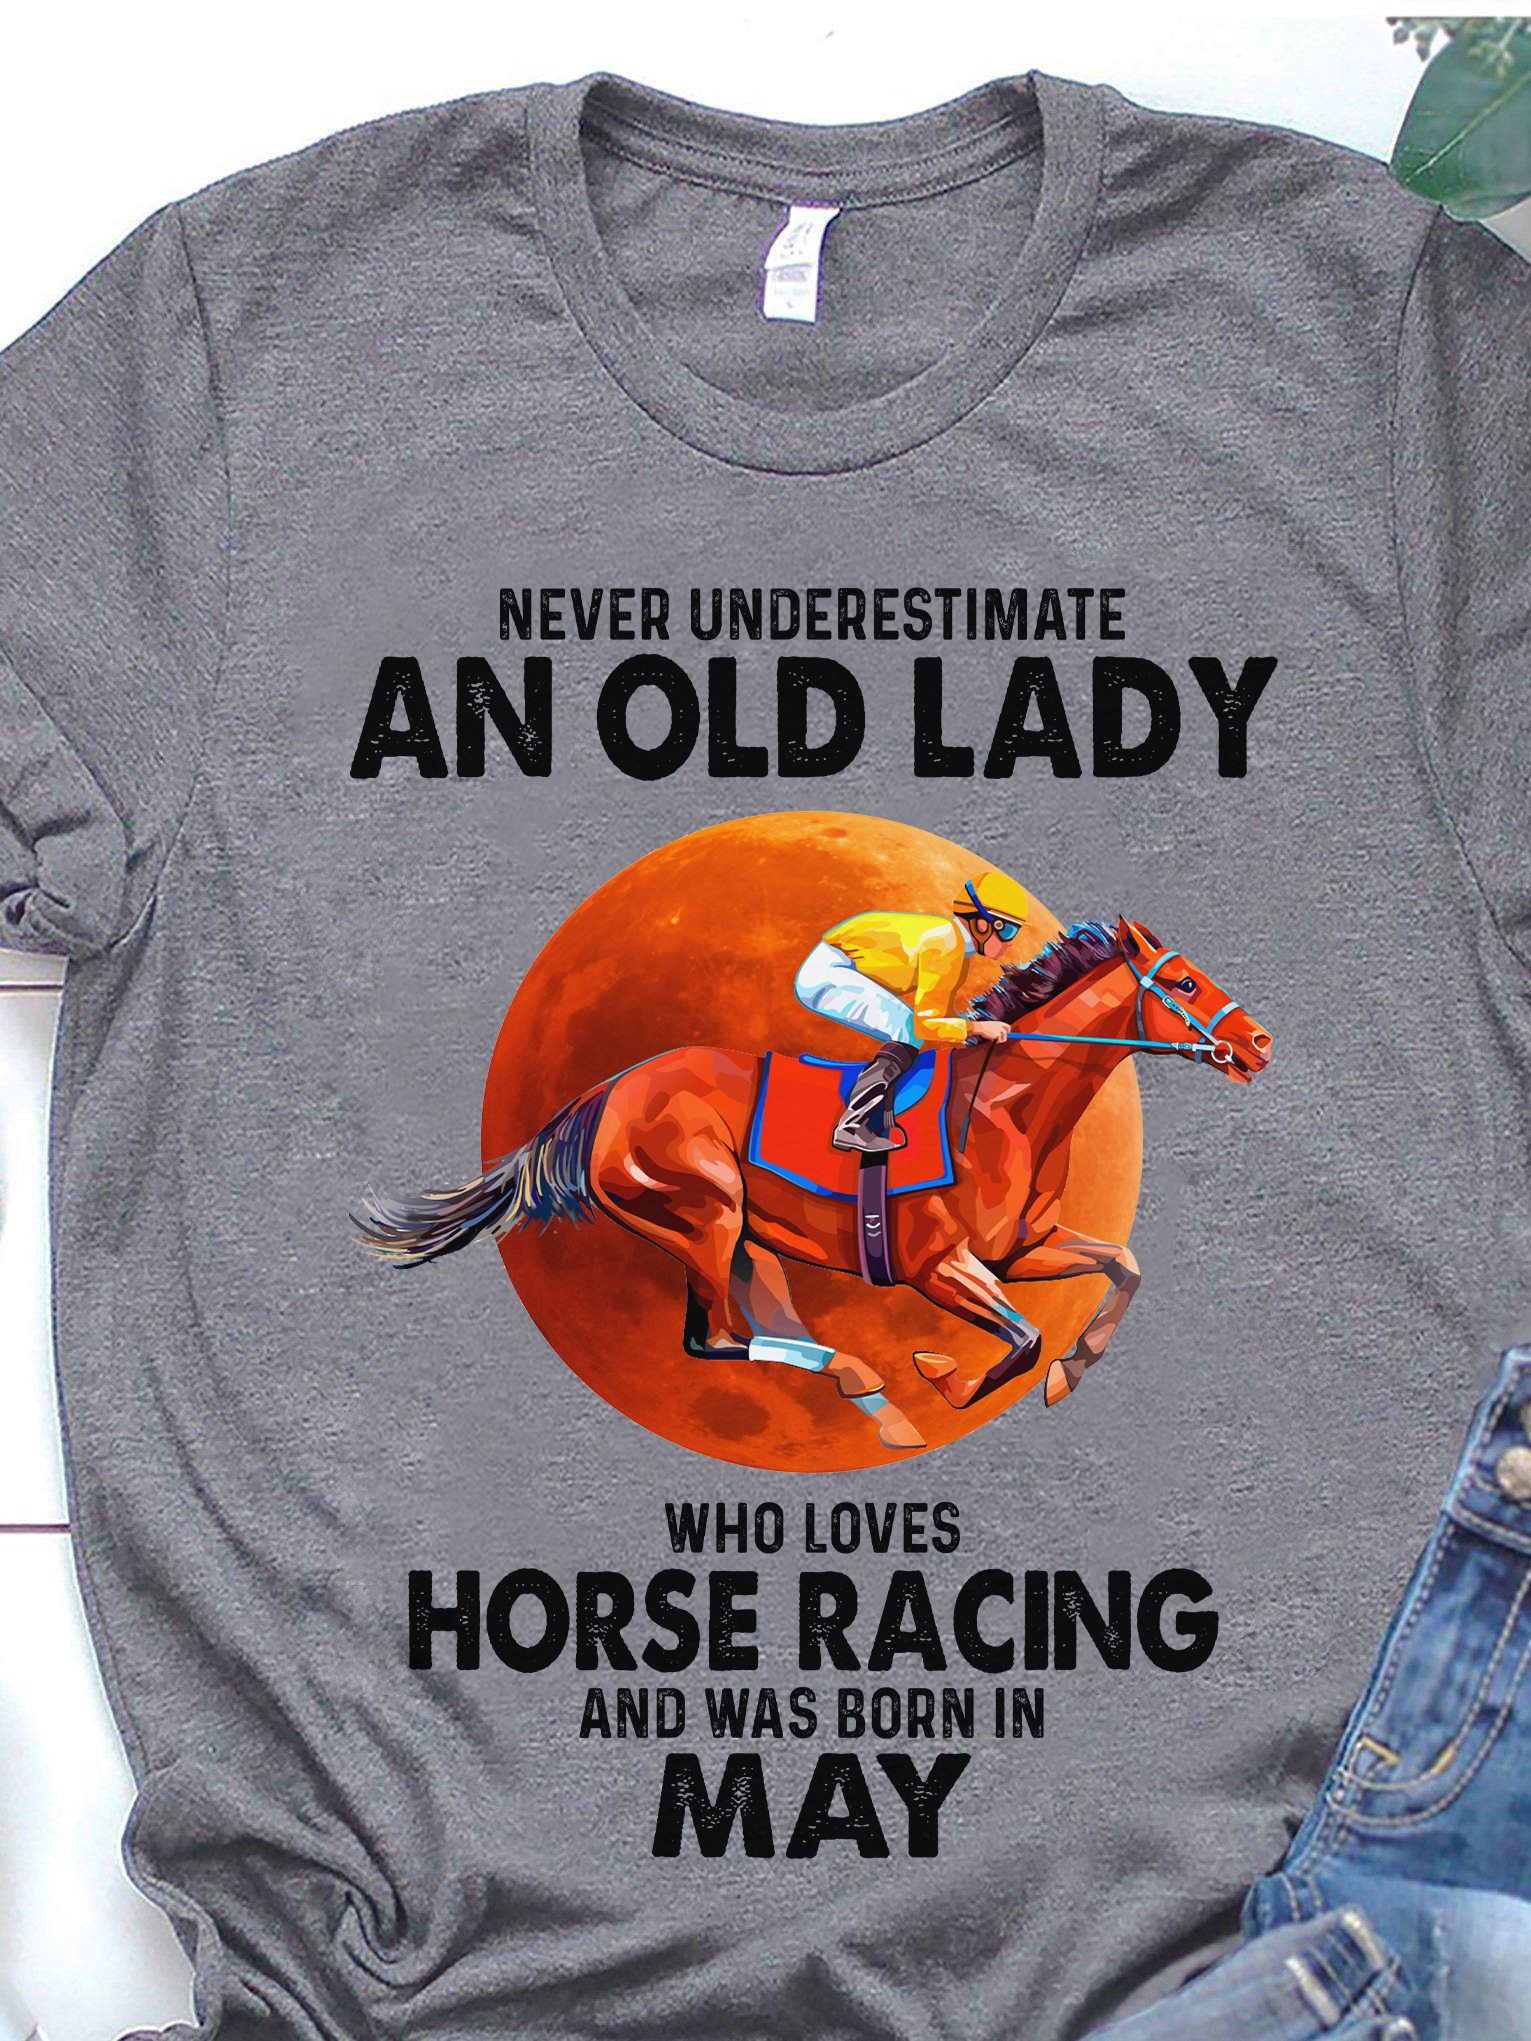 Never underestimate an old lady who loves horse racing and was born in May